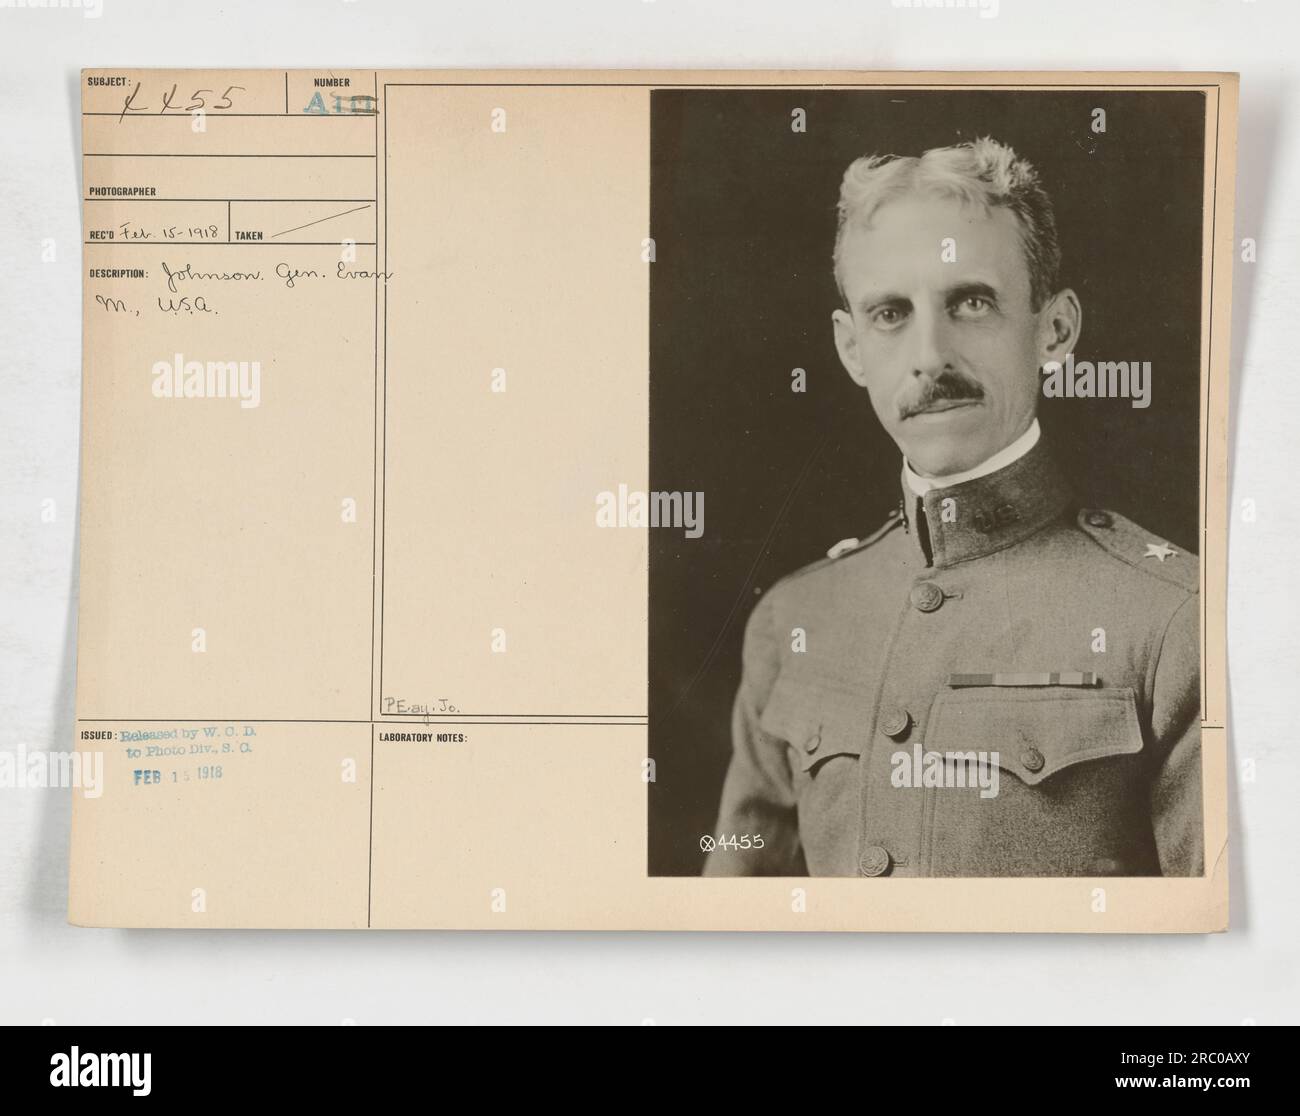 General Evan M. Johnson of the United States Army. February 15, 1918. Photo taken by an unknown photographer. This image was released by the War Office to the Photo Division on February 15, 1918. Laboratory notes indicate that it is assigned the number 04455. Stock Photo